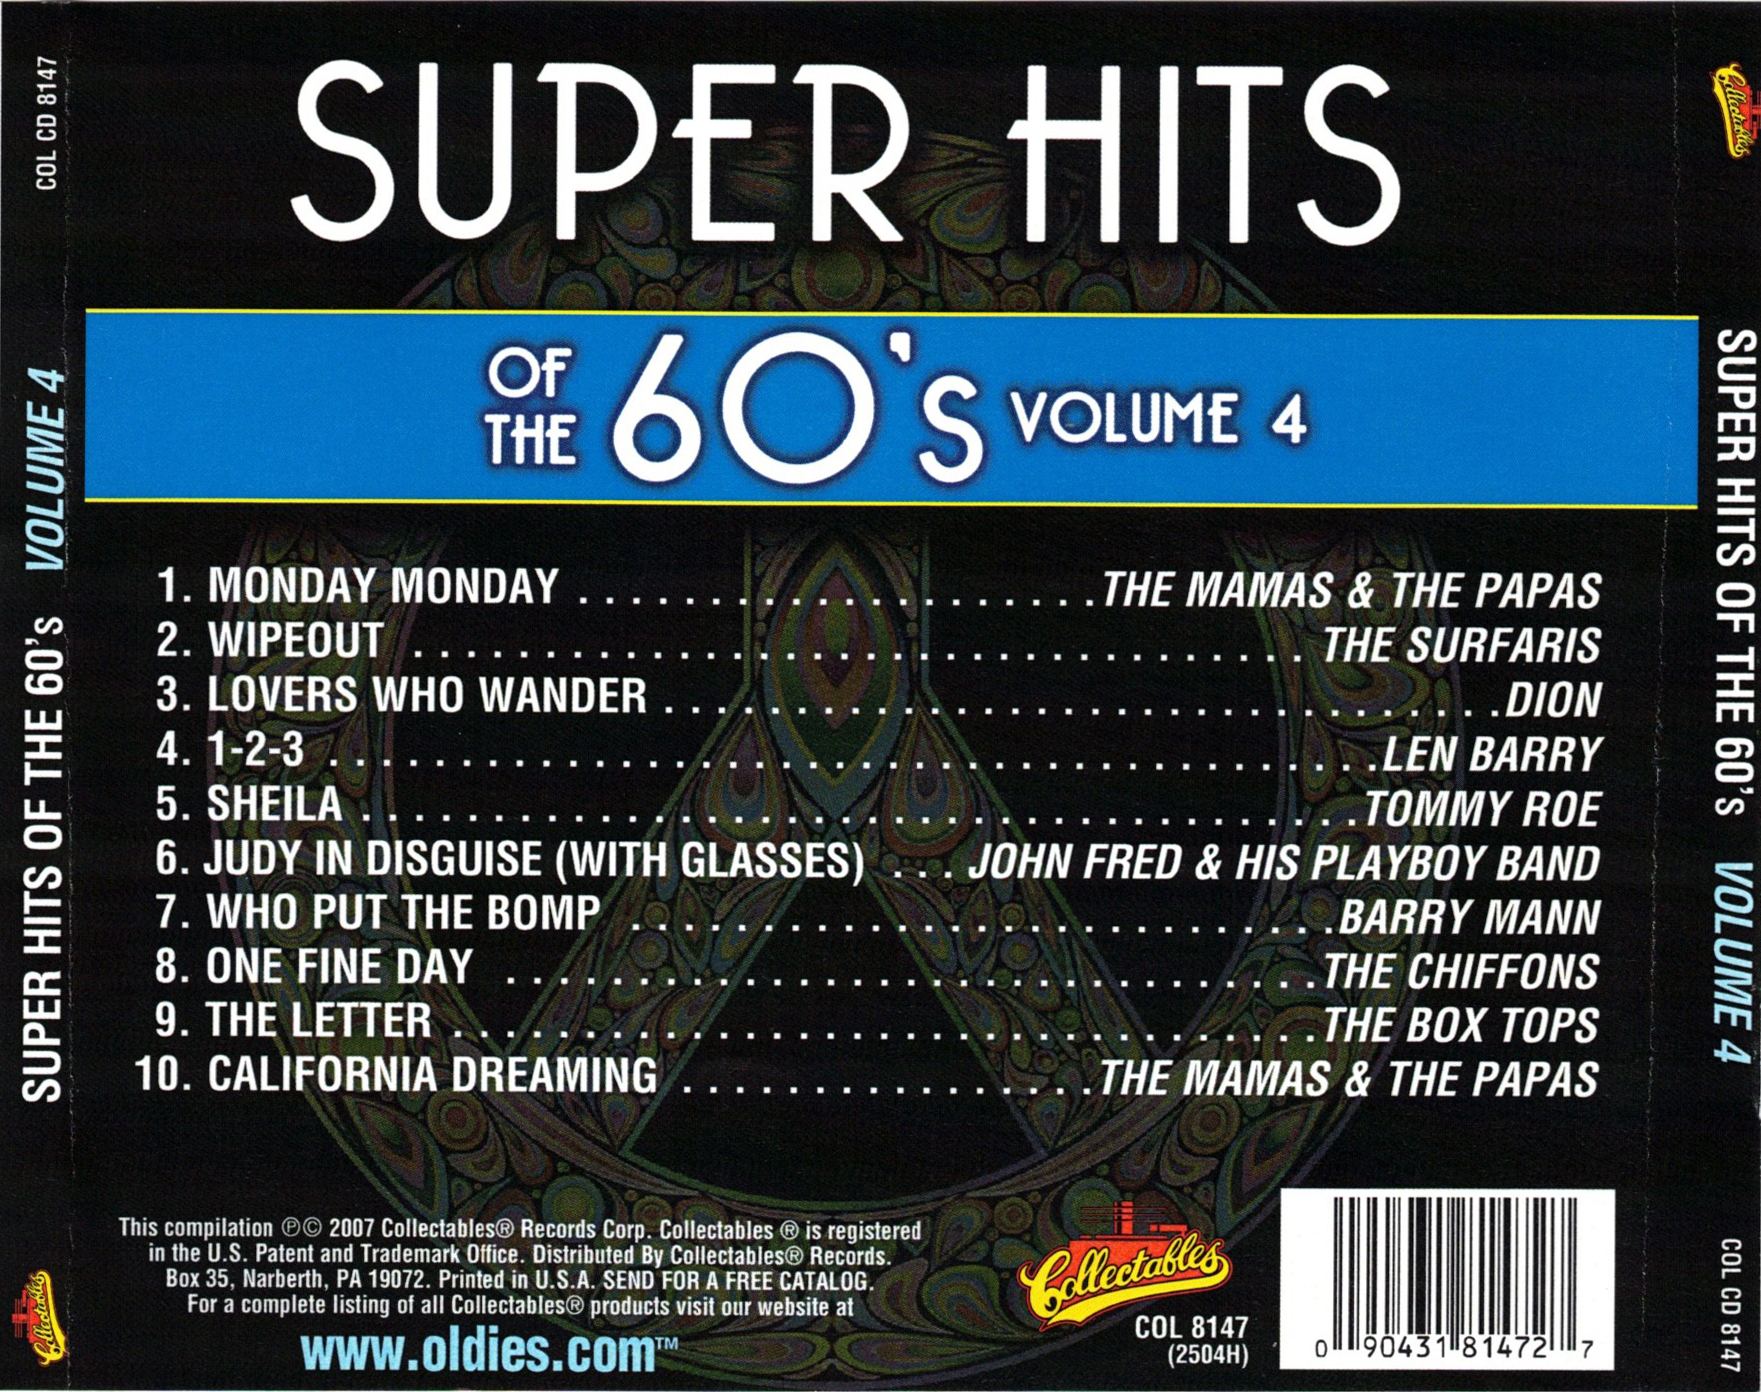 Super Hits Of The 60's, Volume 4